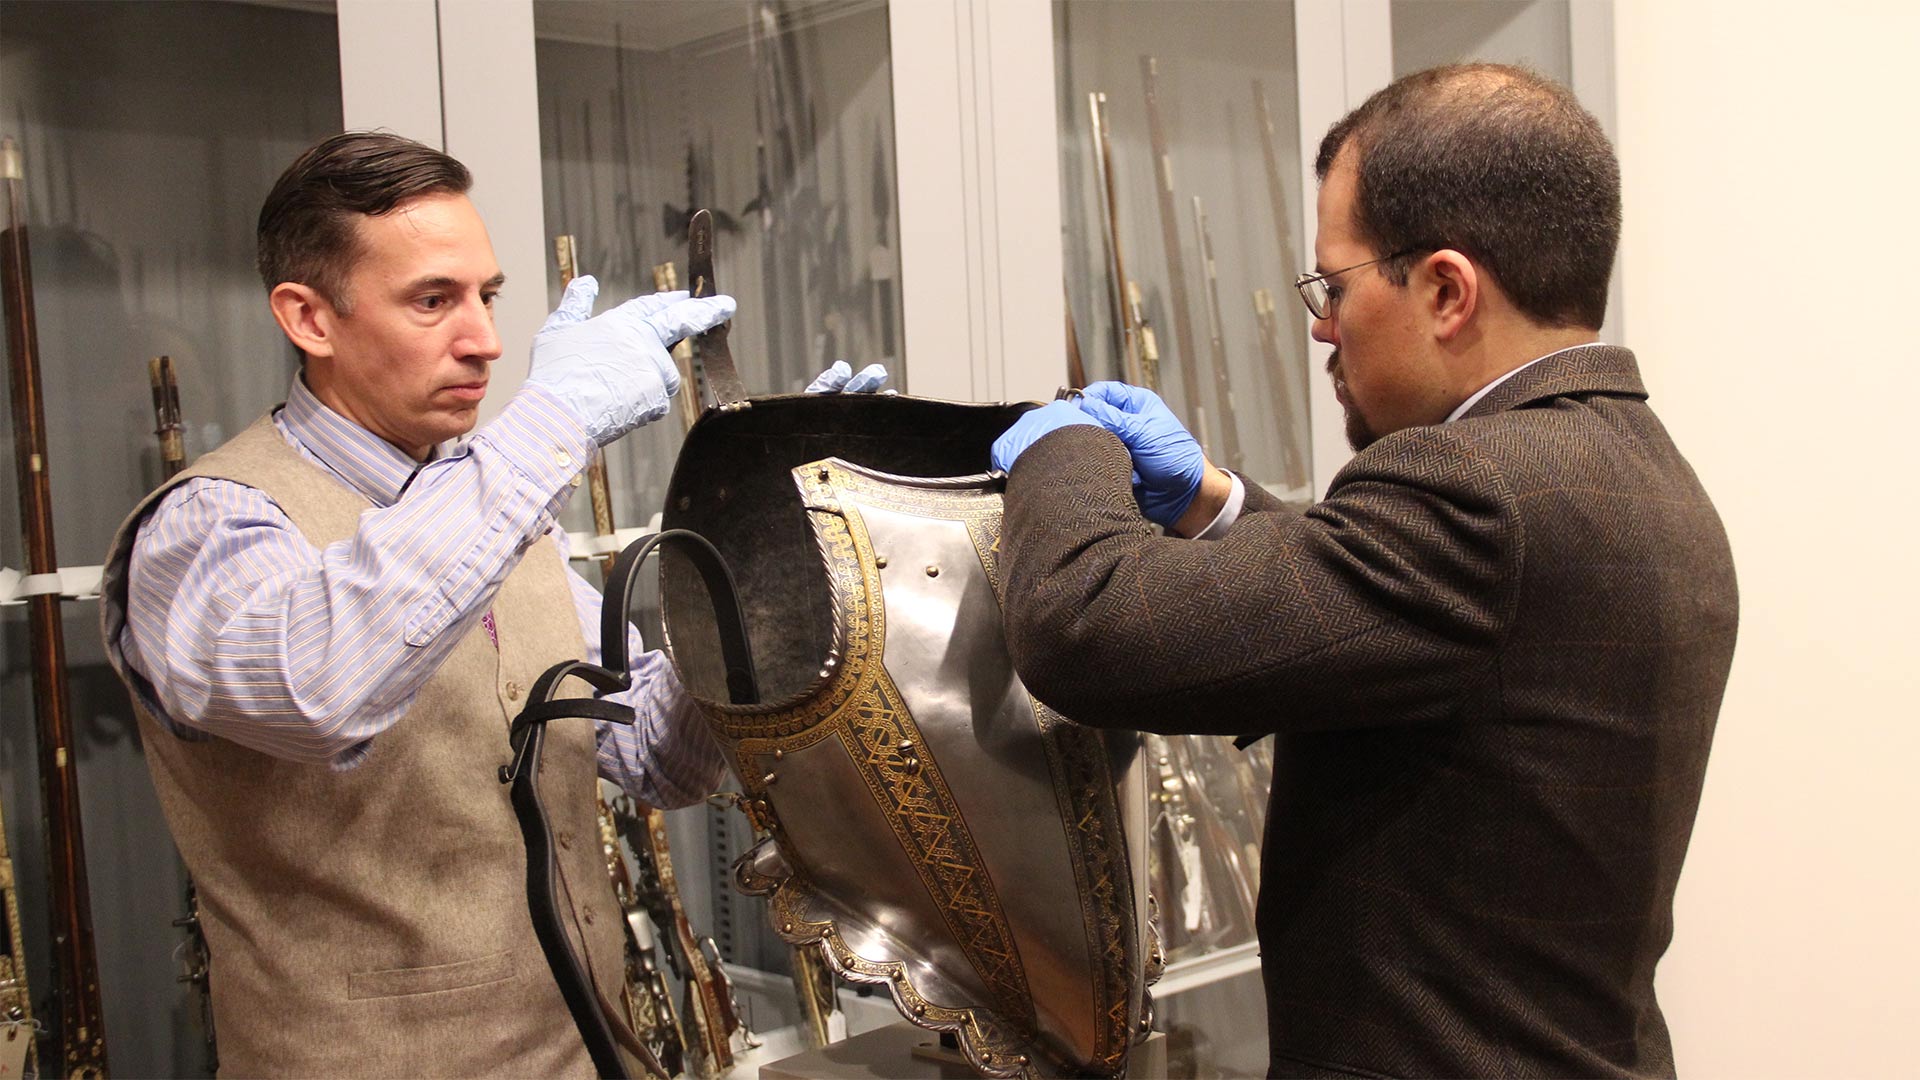 Armorer Jeff Wasson and Associate Curator of Arms and Armor Jonathan Tavares examine a 16th century armor at the Art Institute of Chicago. 